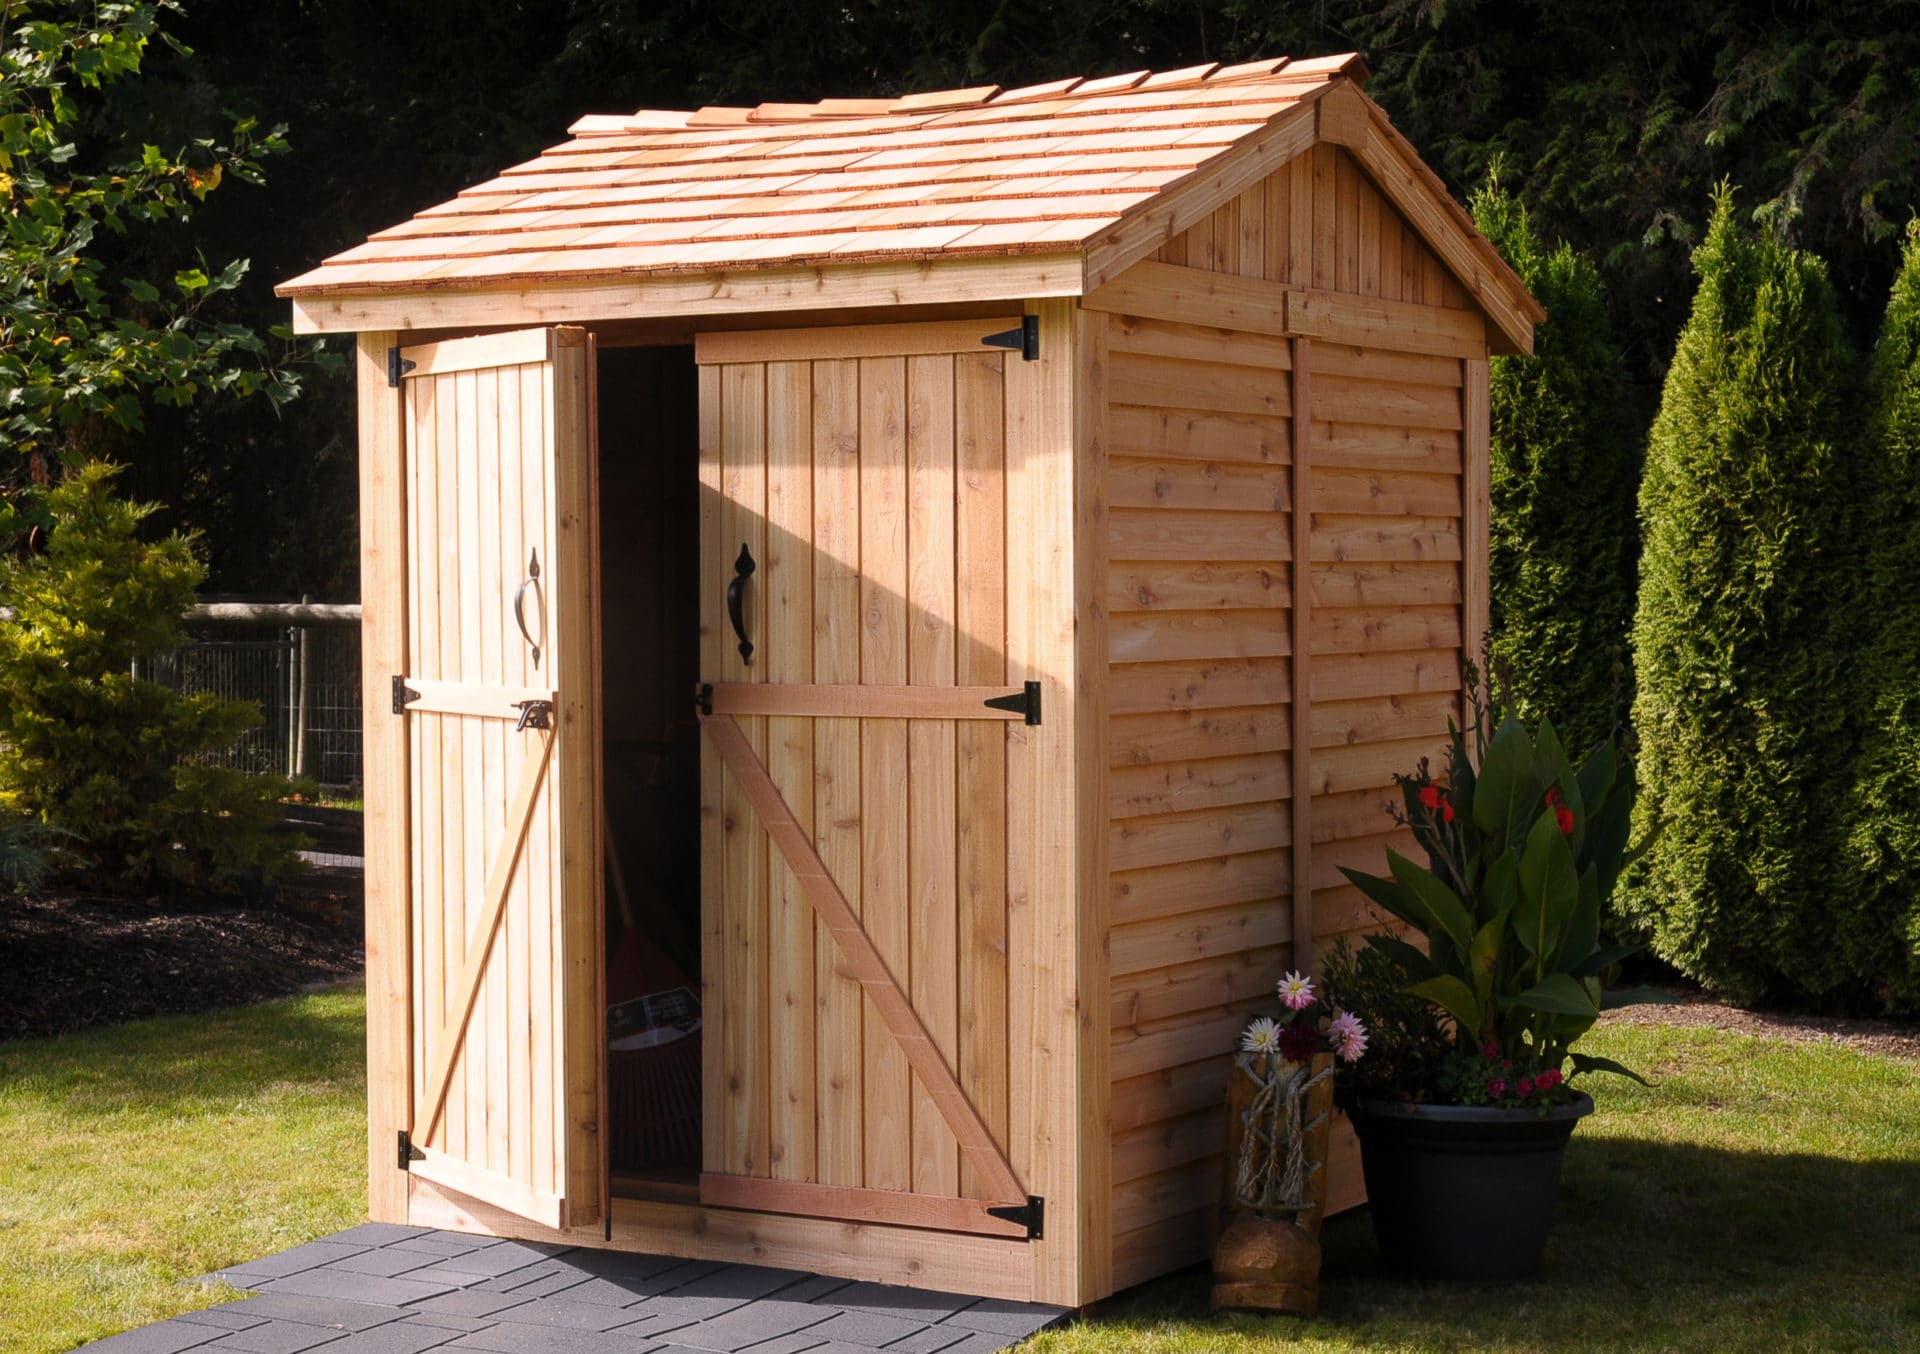 Wooden Sheds | 6x6 Shed | Maximizer Storage Shed - Outdoor Living Today